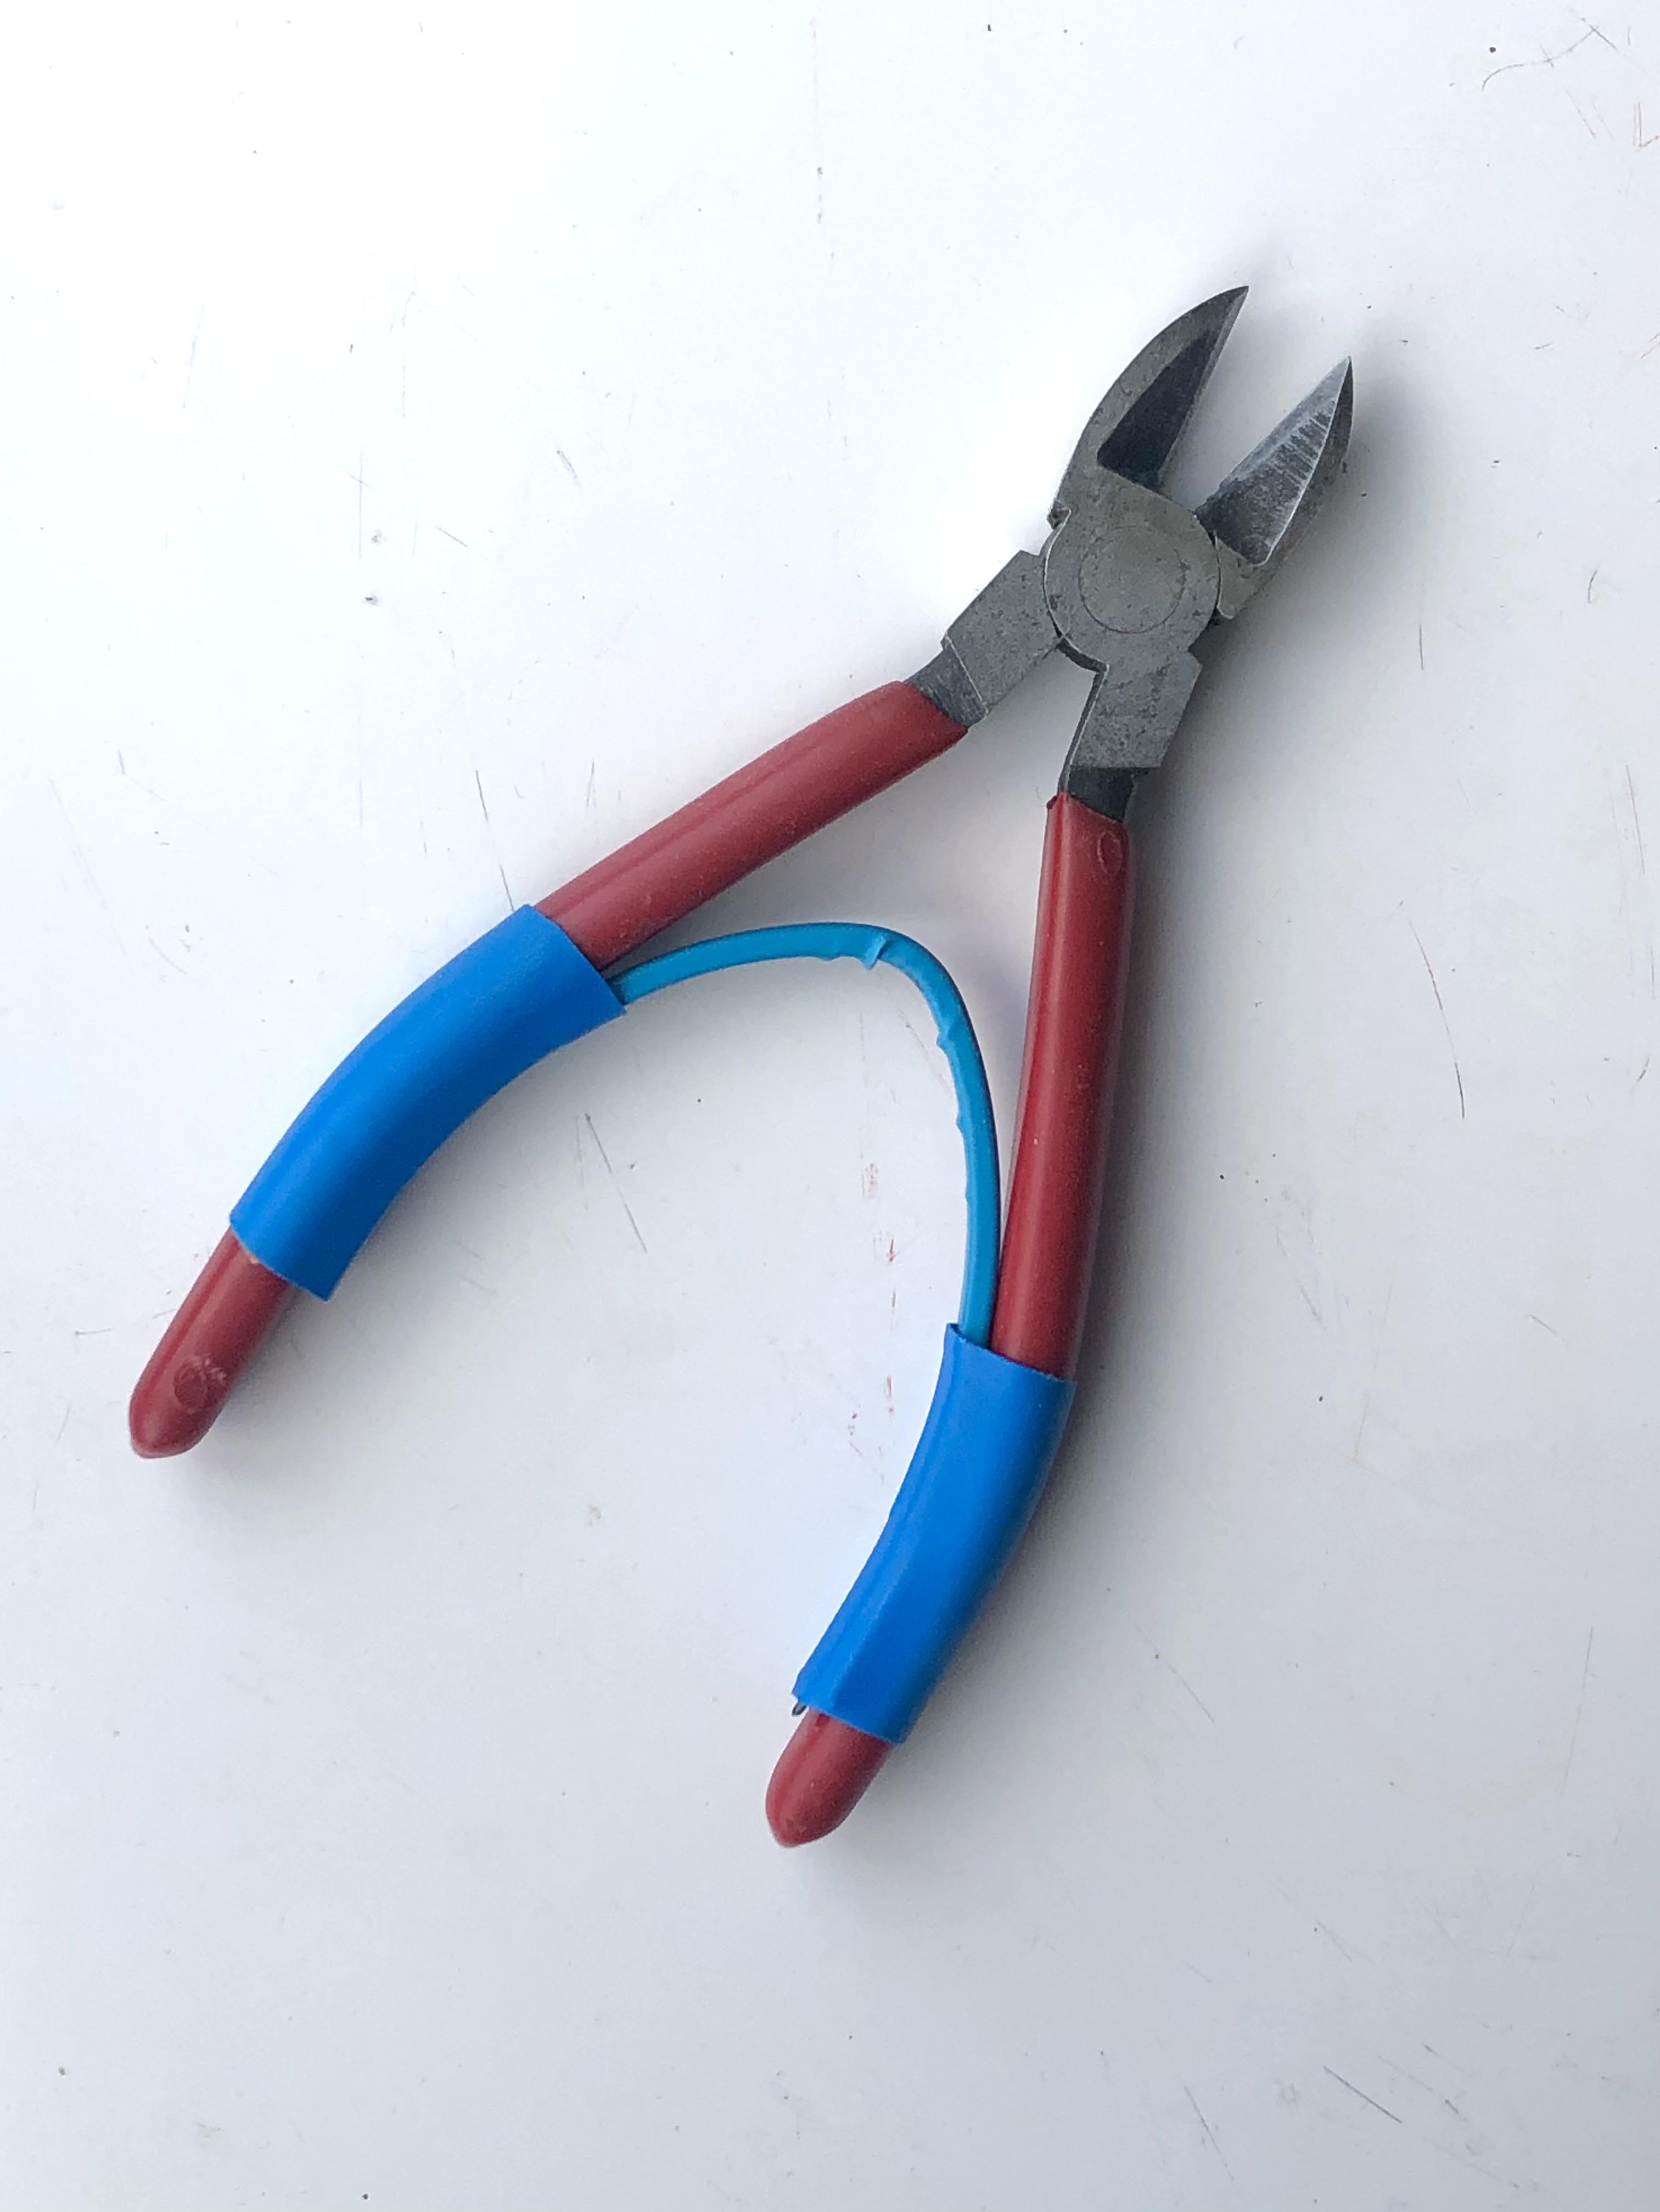 How to Add Spring Loading to Old Tools